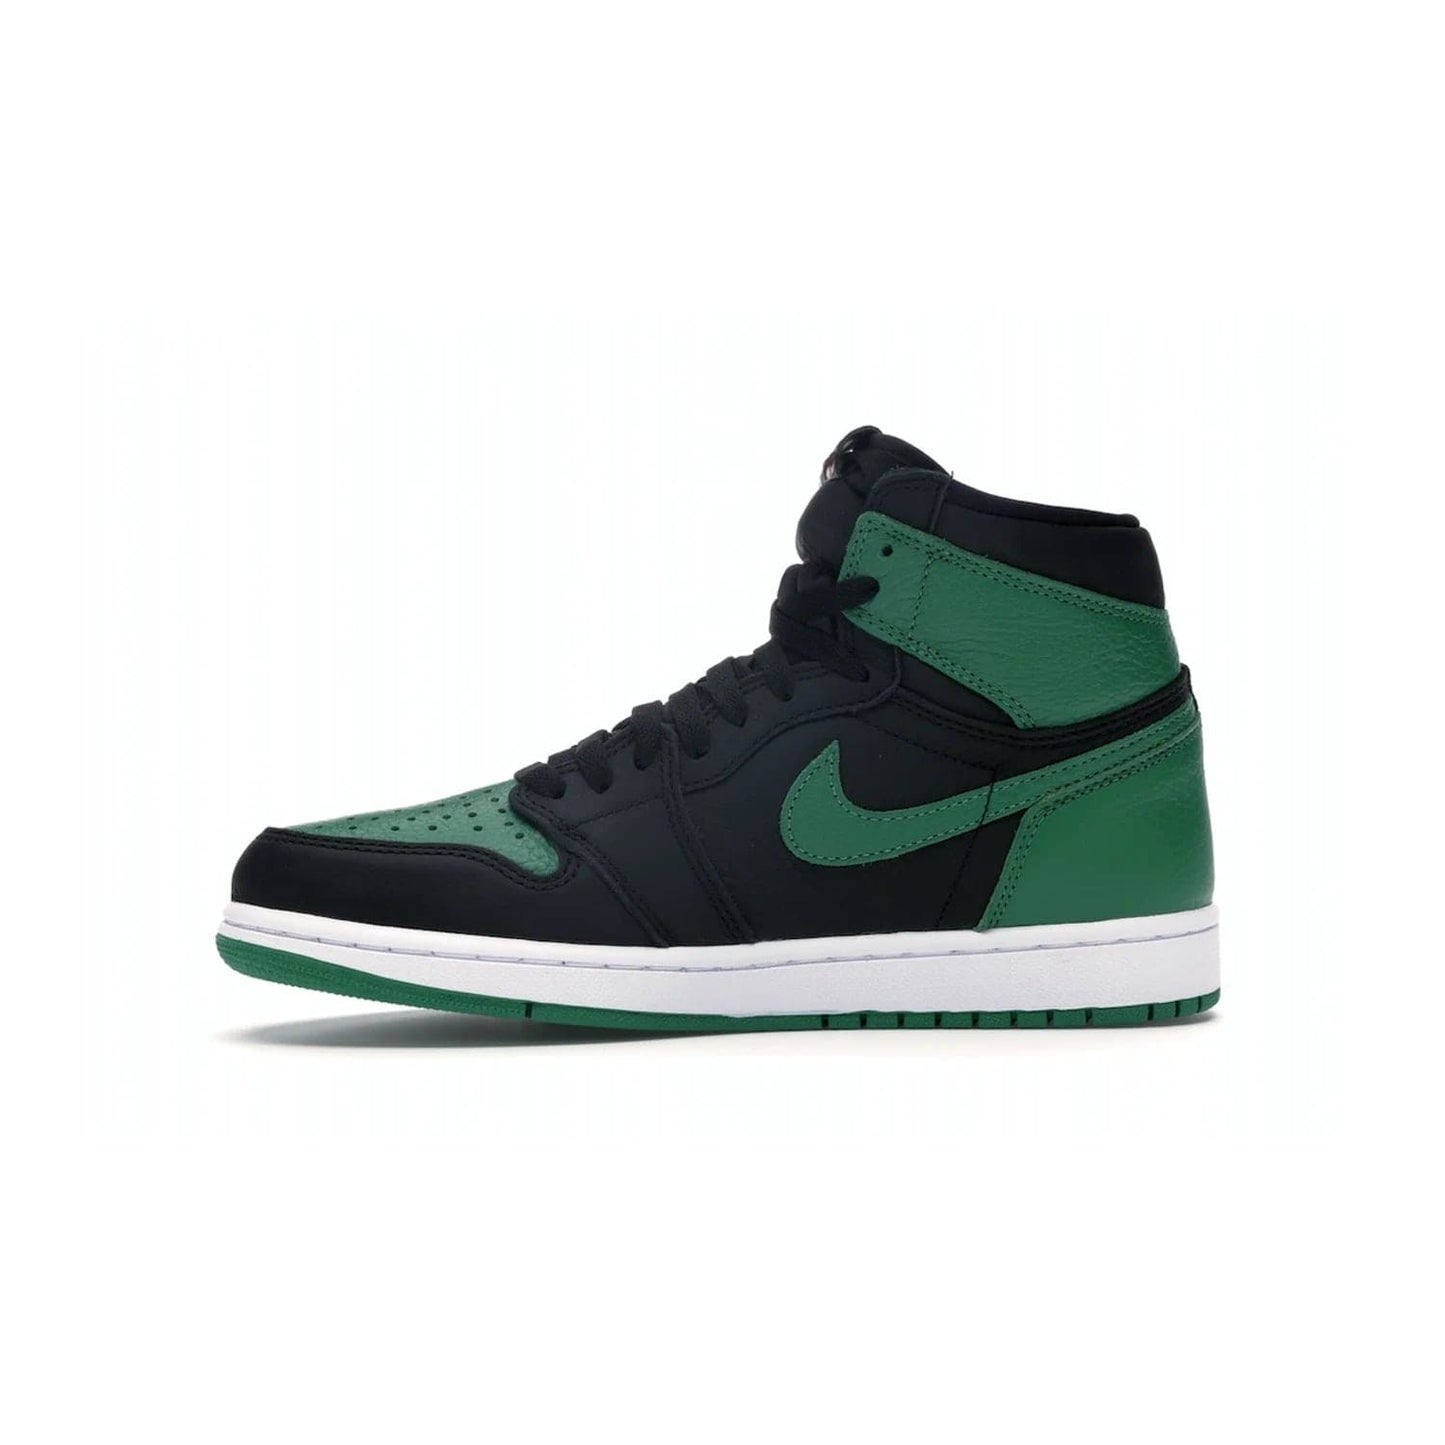 Jordan 1 Retro High Pine Green Black - Image 18 - Only at www.BallersClubKickz.com - Step into fresh style with the Jordan 1 Retro High Pine Green Black. Combining a black tumbled leather upper with green leather overlays, this sneaker features a Gym Red embroidered tongue tag, sail midsole, and pine green outsole for iconic style with a unique twist.